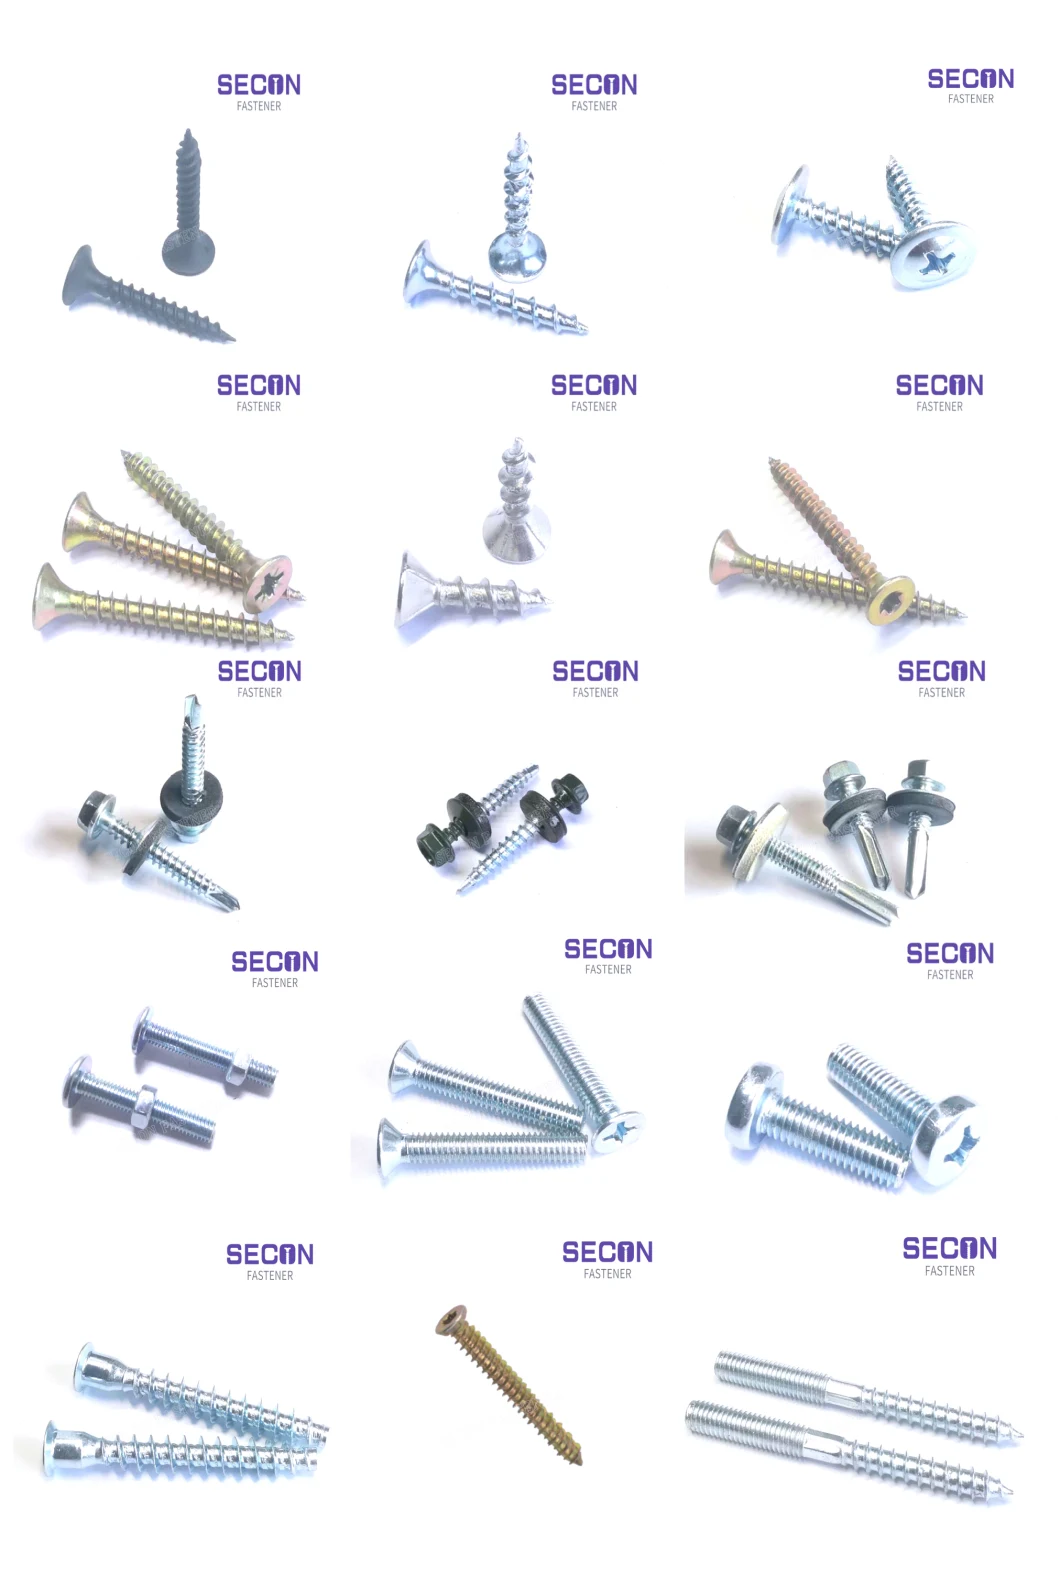 China Factory Supply DIN571 Wood Screw Drywall Screw/ Self Tapping Screw/Self Drilling Screw/Chipboard Screw/Wood Screw/Roofing Screw/Machine Screw/Tornillo/